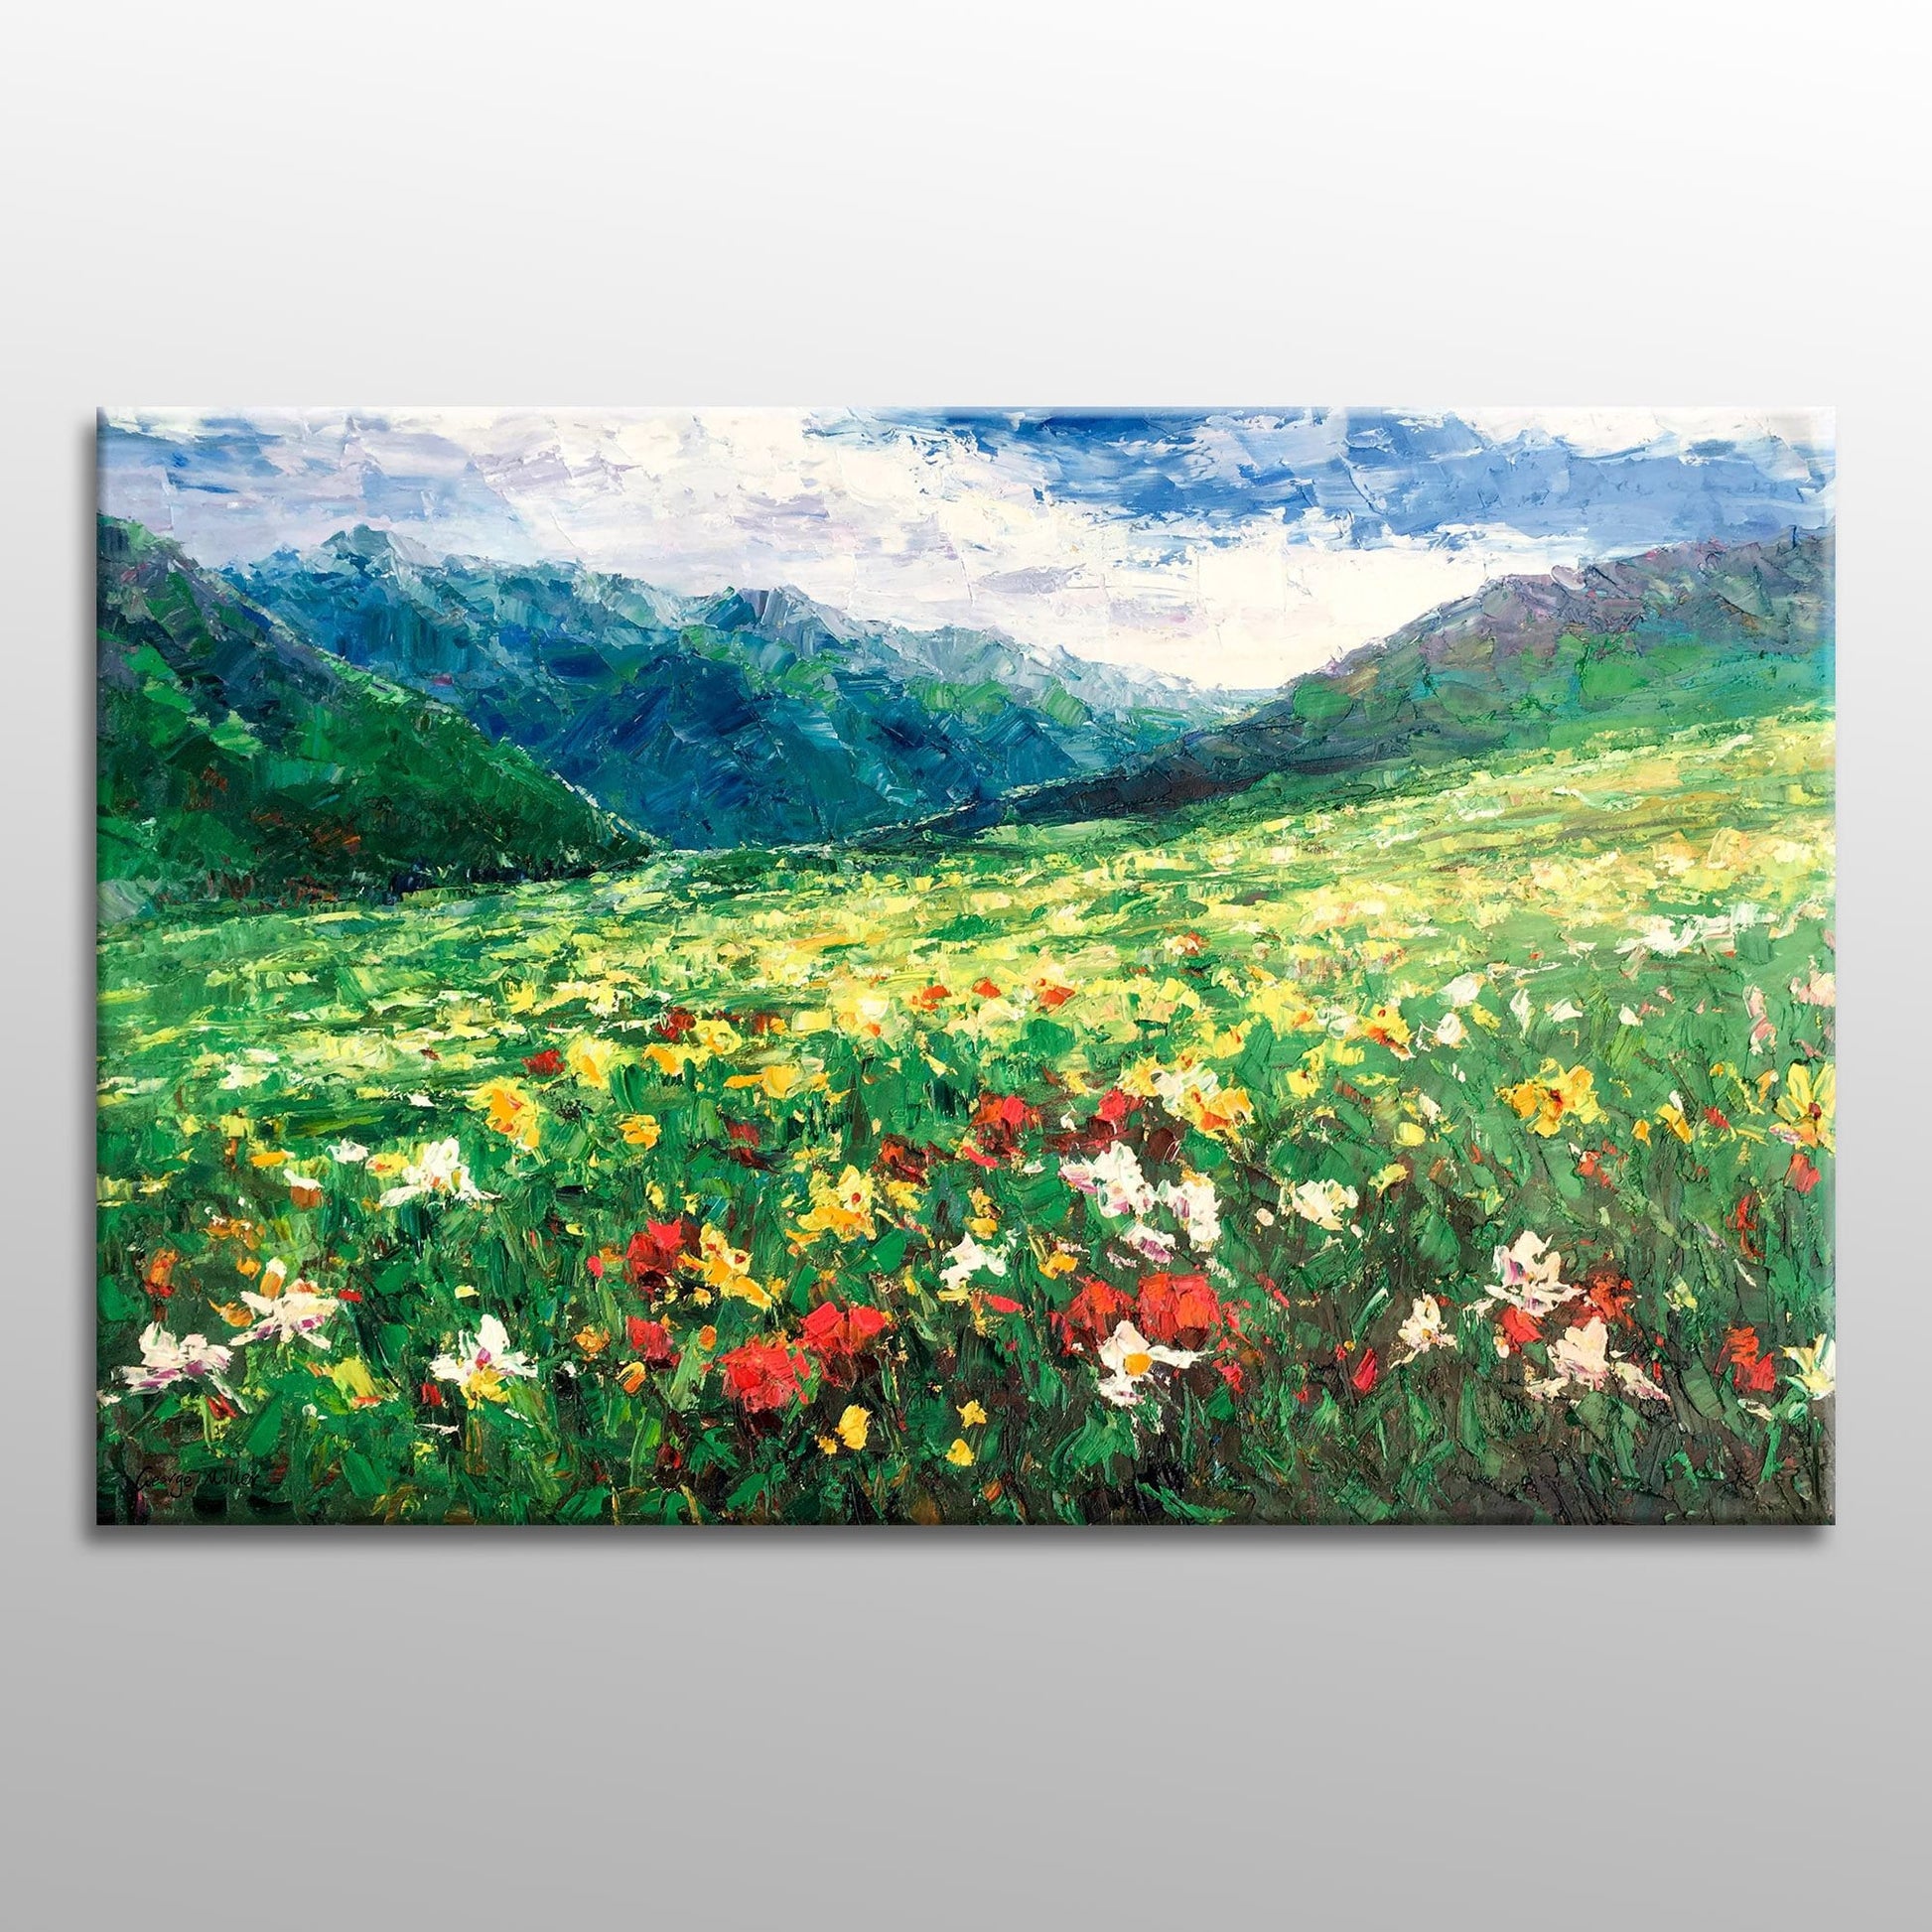 Landscape Oil Painting Spring Mountains, Coffee Wall Art, Abstract Canvas Art, Contemporary Painting, Oil Painting Original, Landscape Art